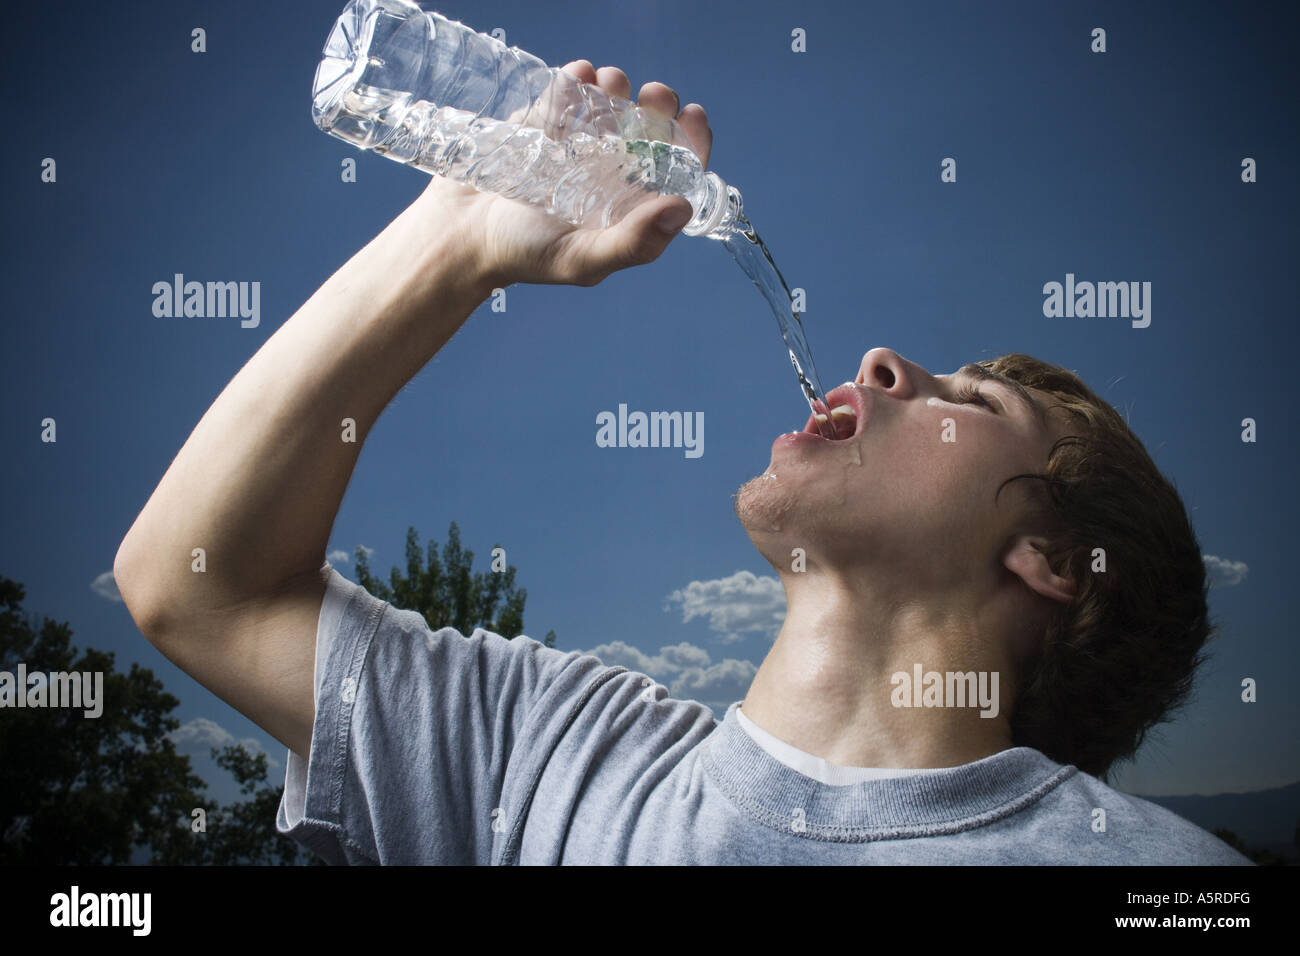 Teen boy wiping his brow and drinking water from a bottle, Stock image